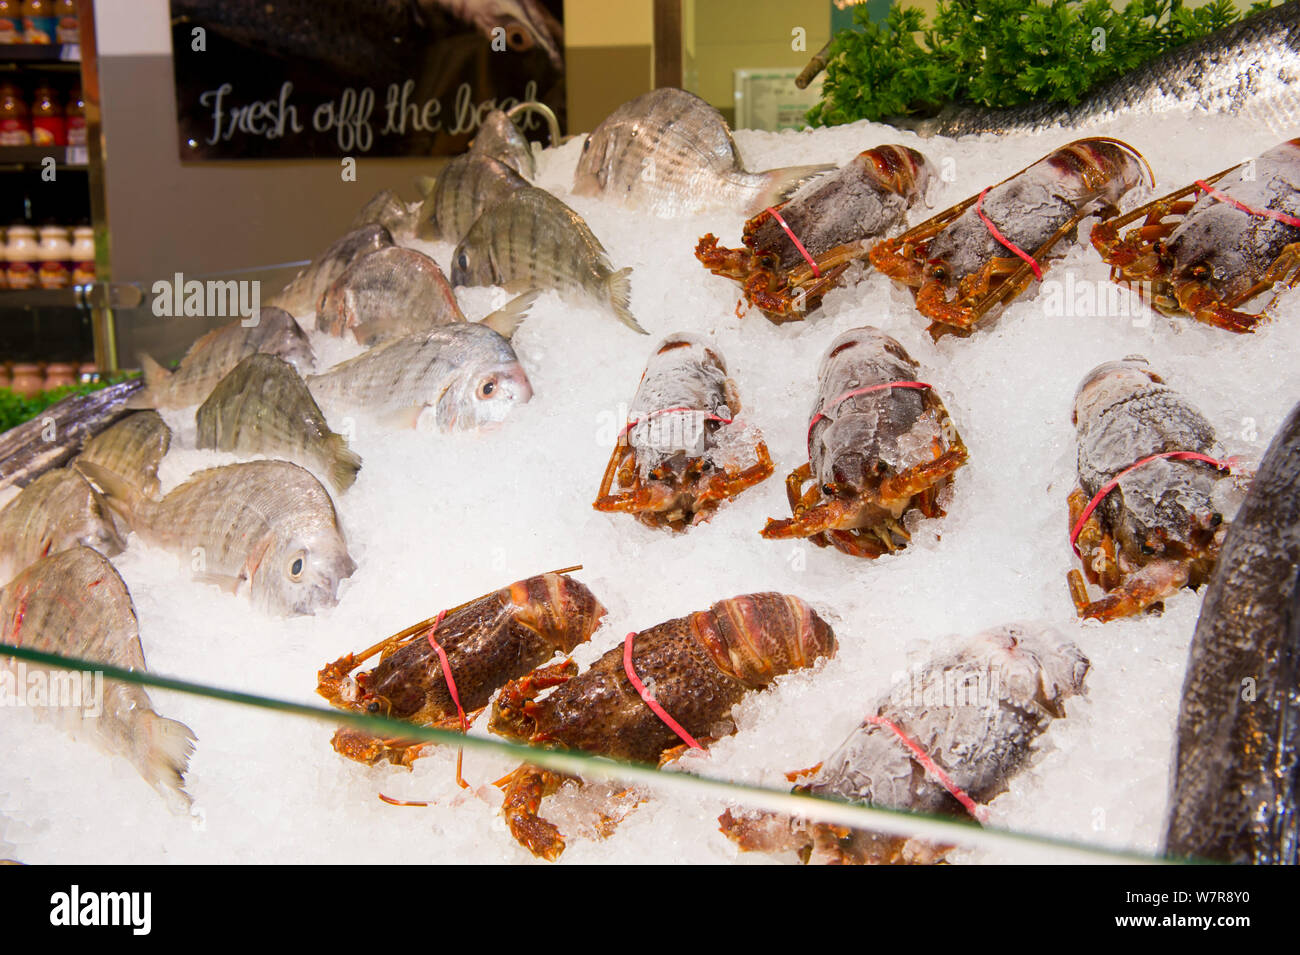 West coast rock lobster (Jasus lalandii) on ice at a seafood counter in the Food Lovers Supermarket, Noordhoek, Longbeach Mall, South Africa Stock Photo